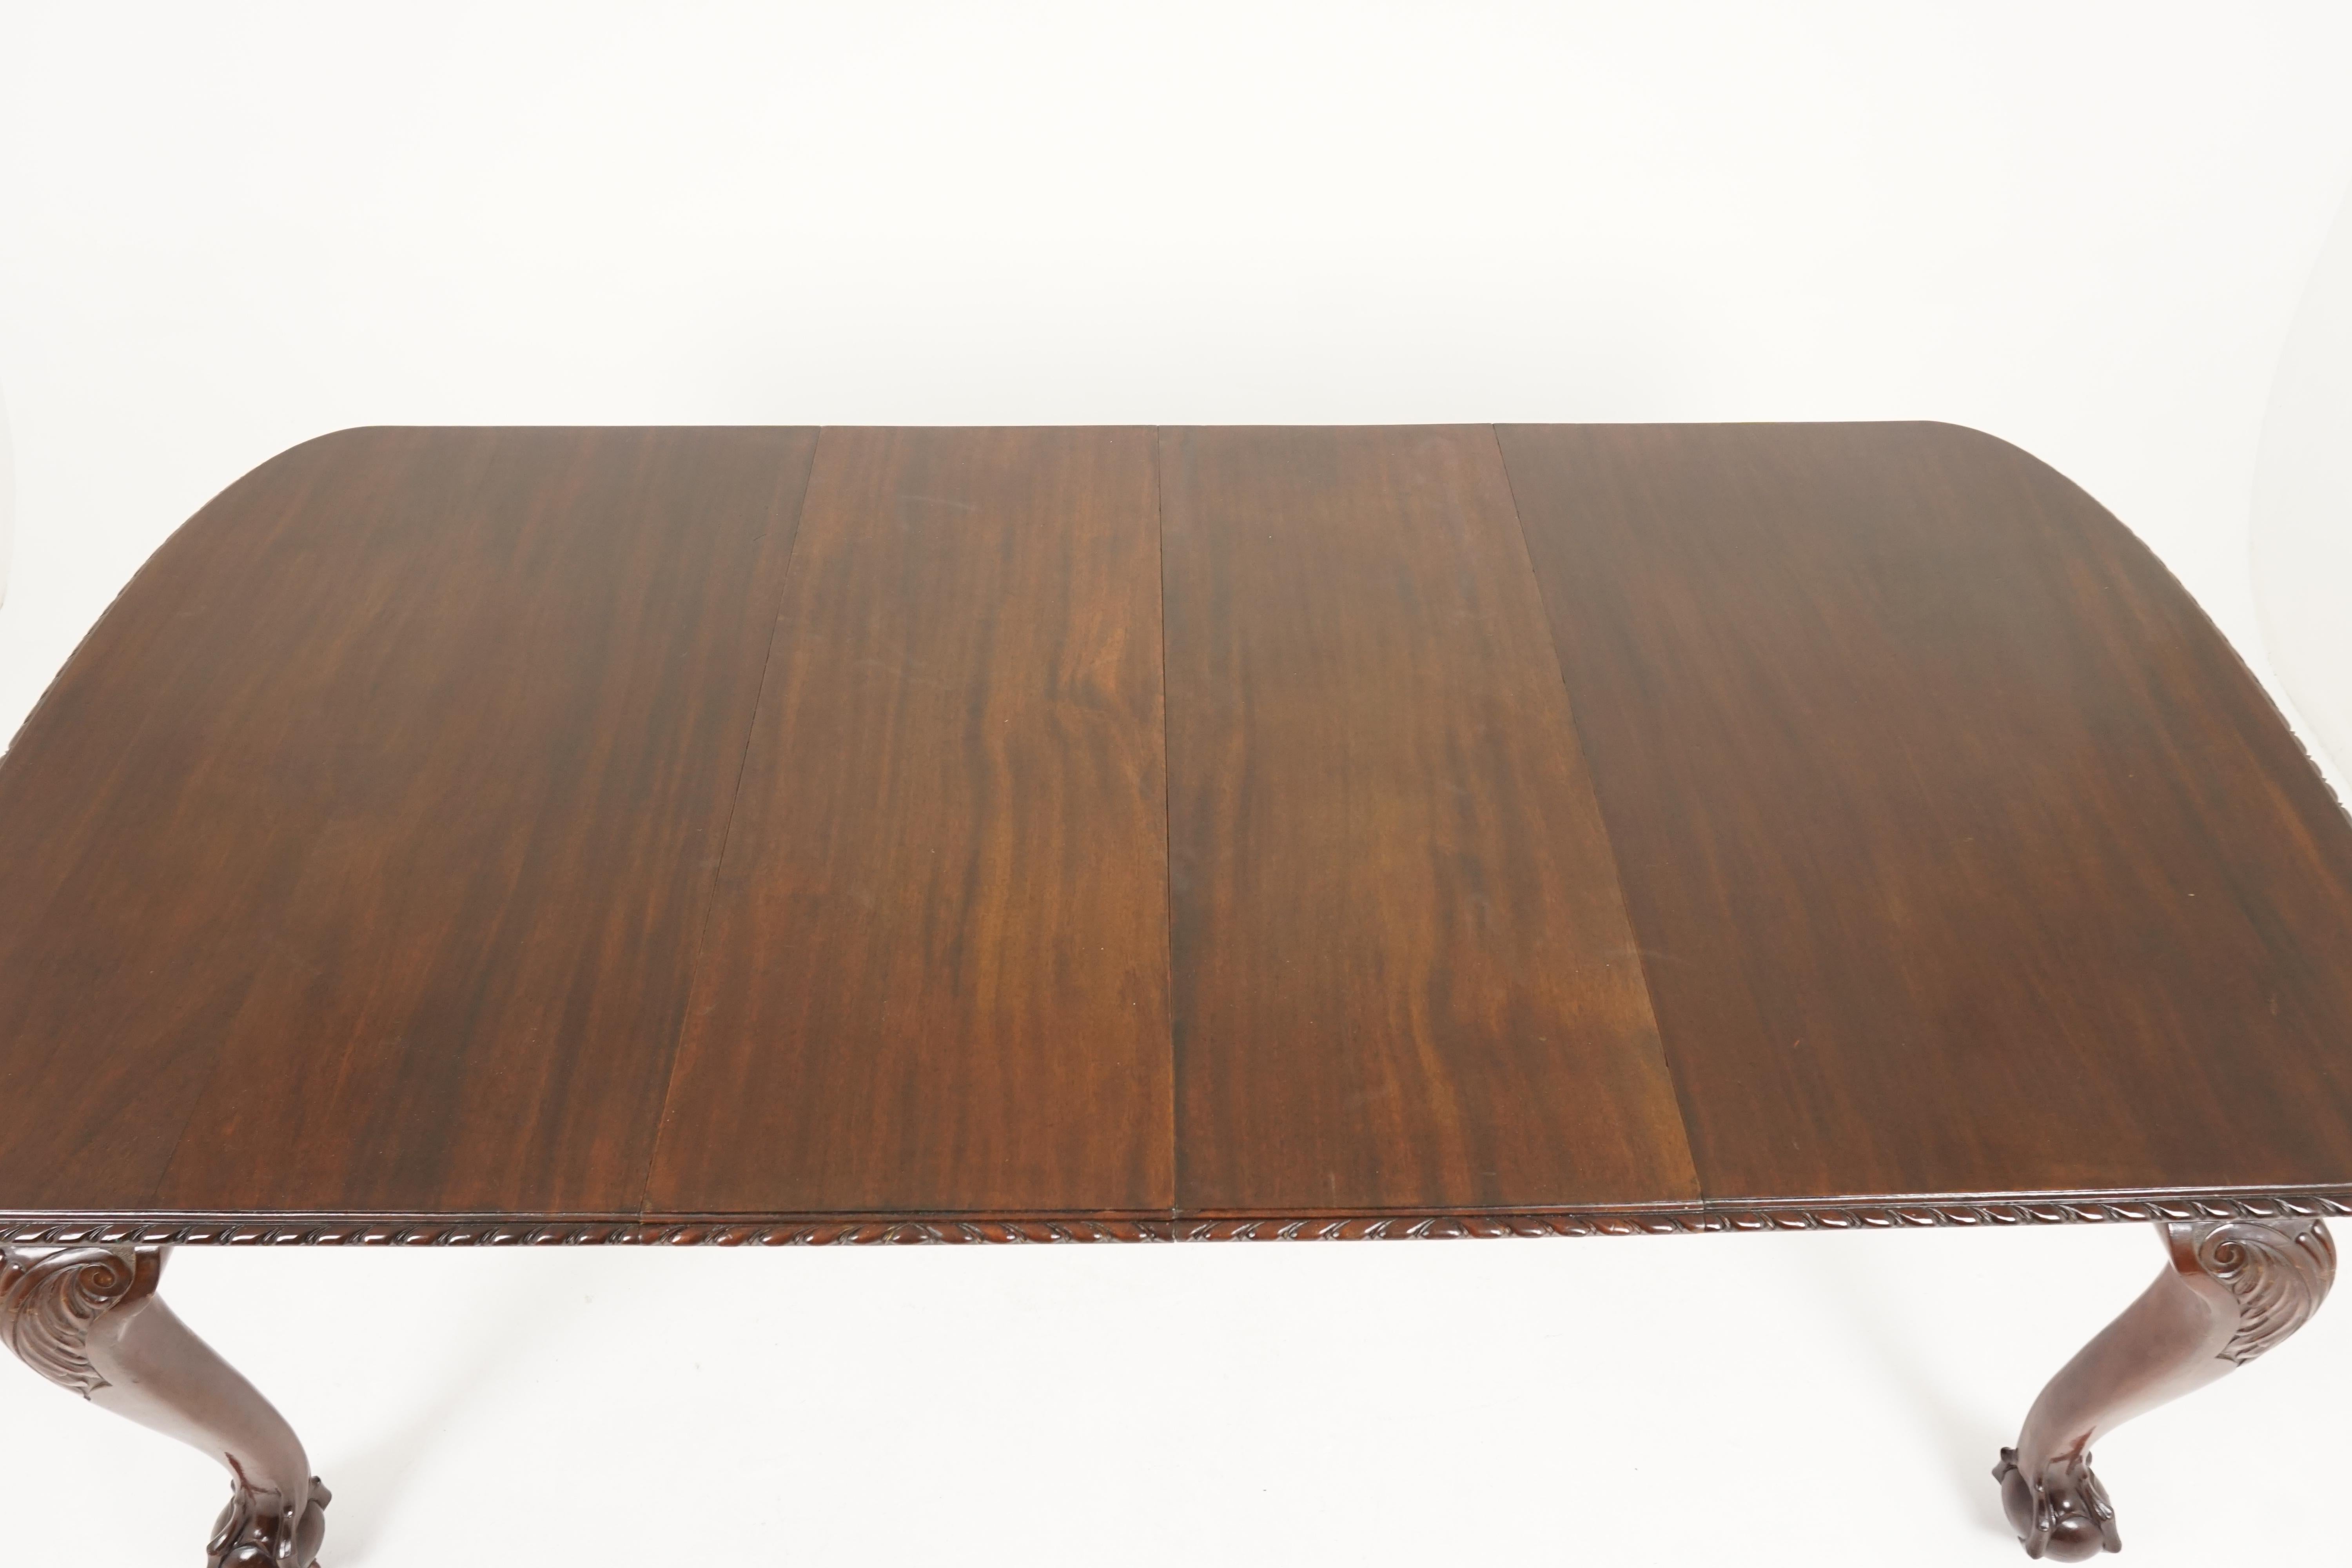 Antique large Walnut extending dining table, Scotland 1910, B2114

Scotland, 1910
Solid Walnut
Original finish
It has a slightly bowed shape to each end
A beautifully carved gadrooned edge
A table has two extra leaves that can be put into place